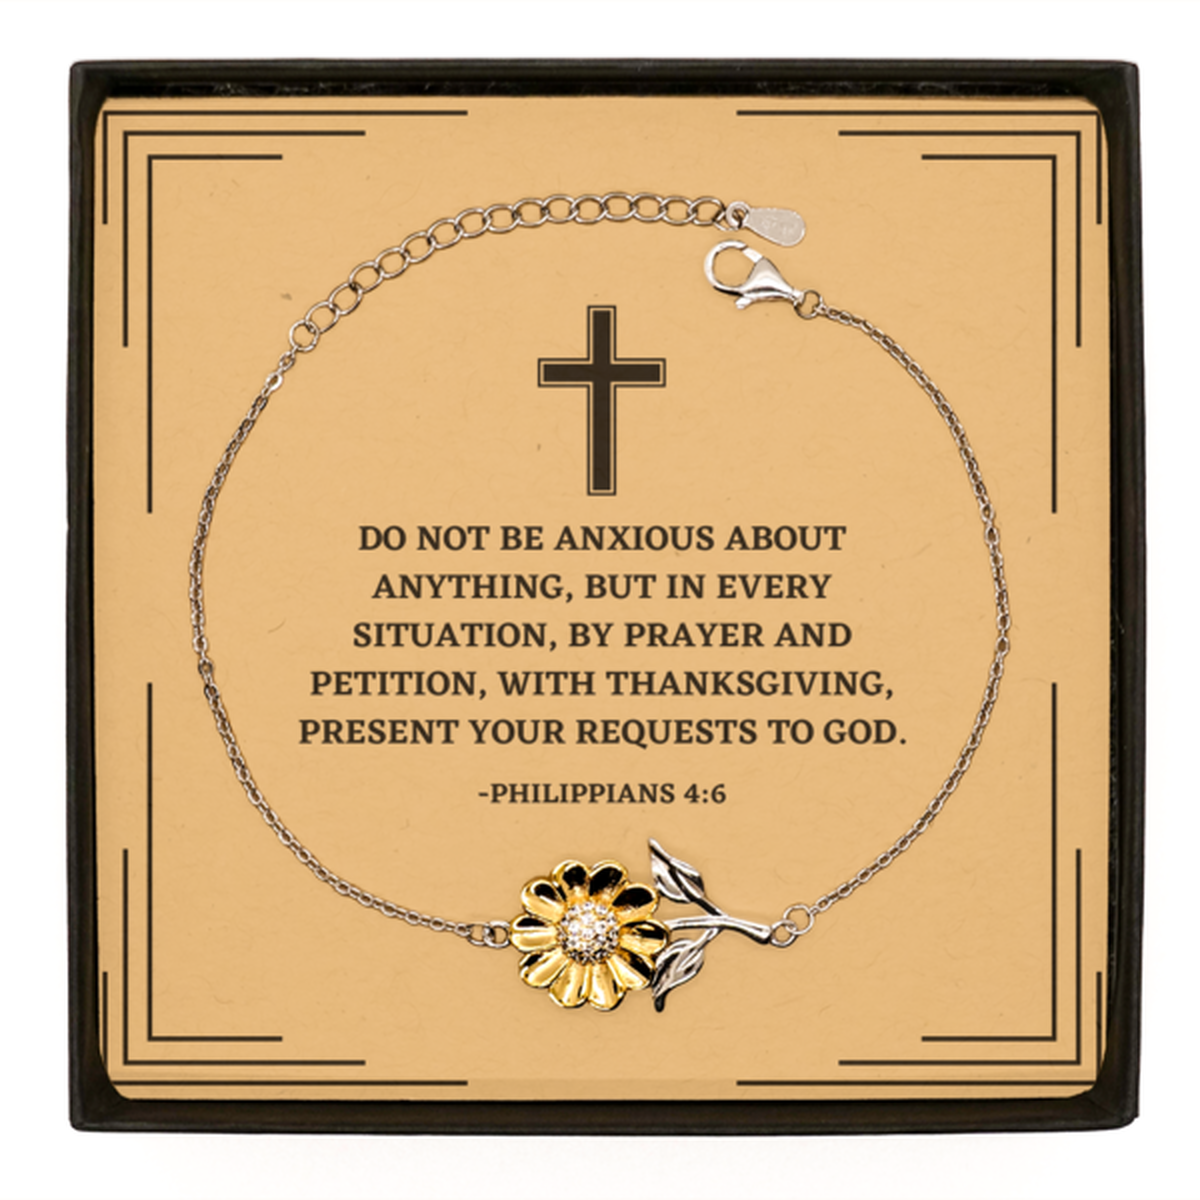 Baptism Gifts For Teenage Boys Girls, Christian Bible Verse Sterling Silver Sunflower Bracelet, Do not be anxious about anything, Confirmation Gifts, Bible Verse Card for Son, Godson, Grandson